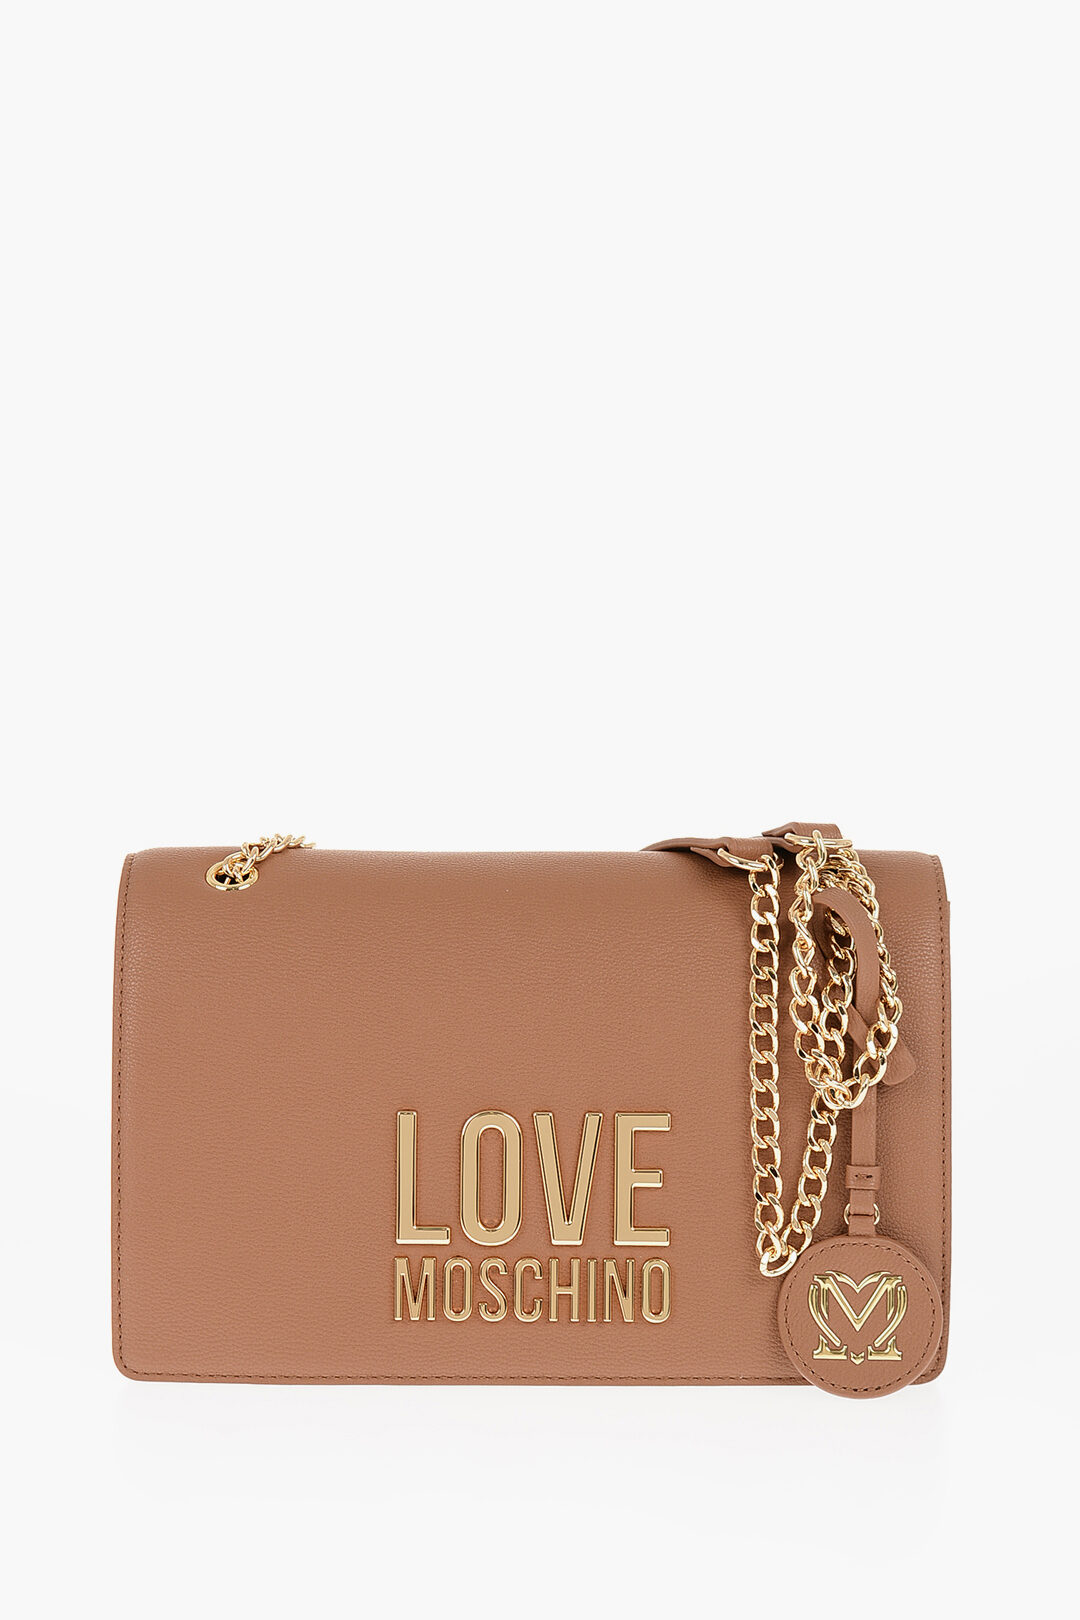 Moschino LOVE golden details faux leather Saddle bag women - Glamood Outlet